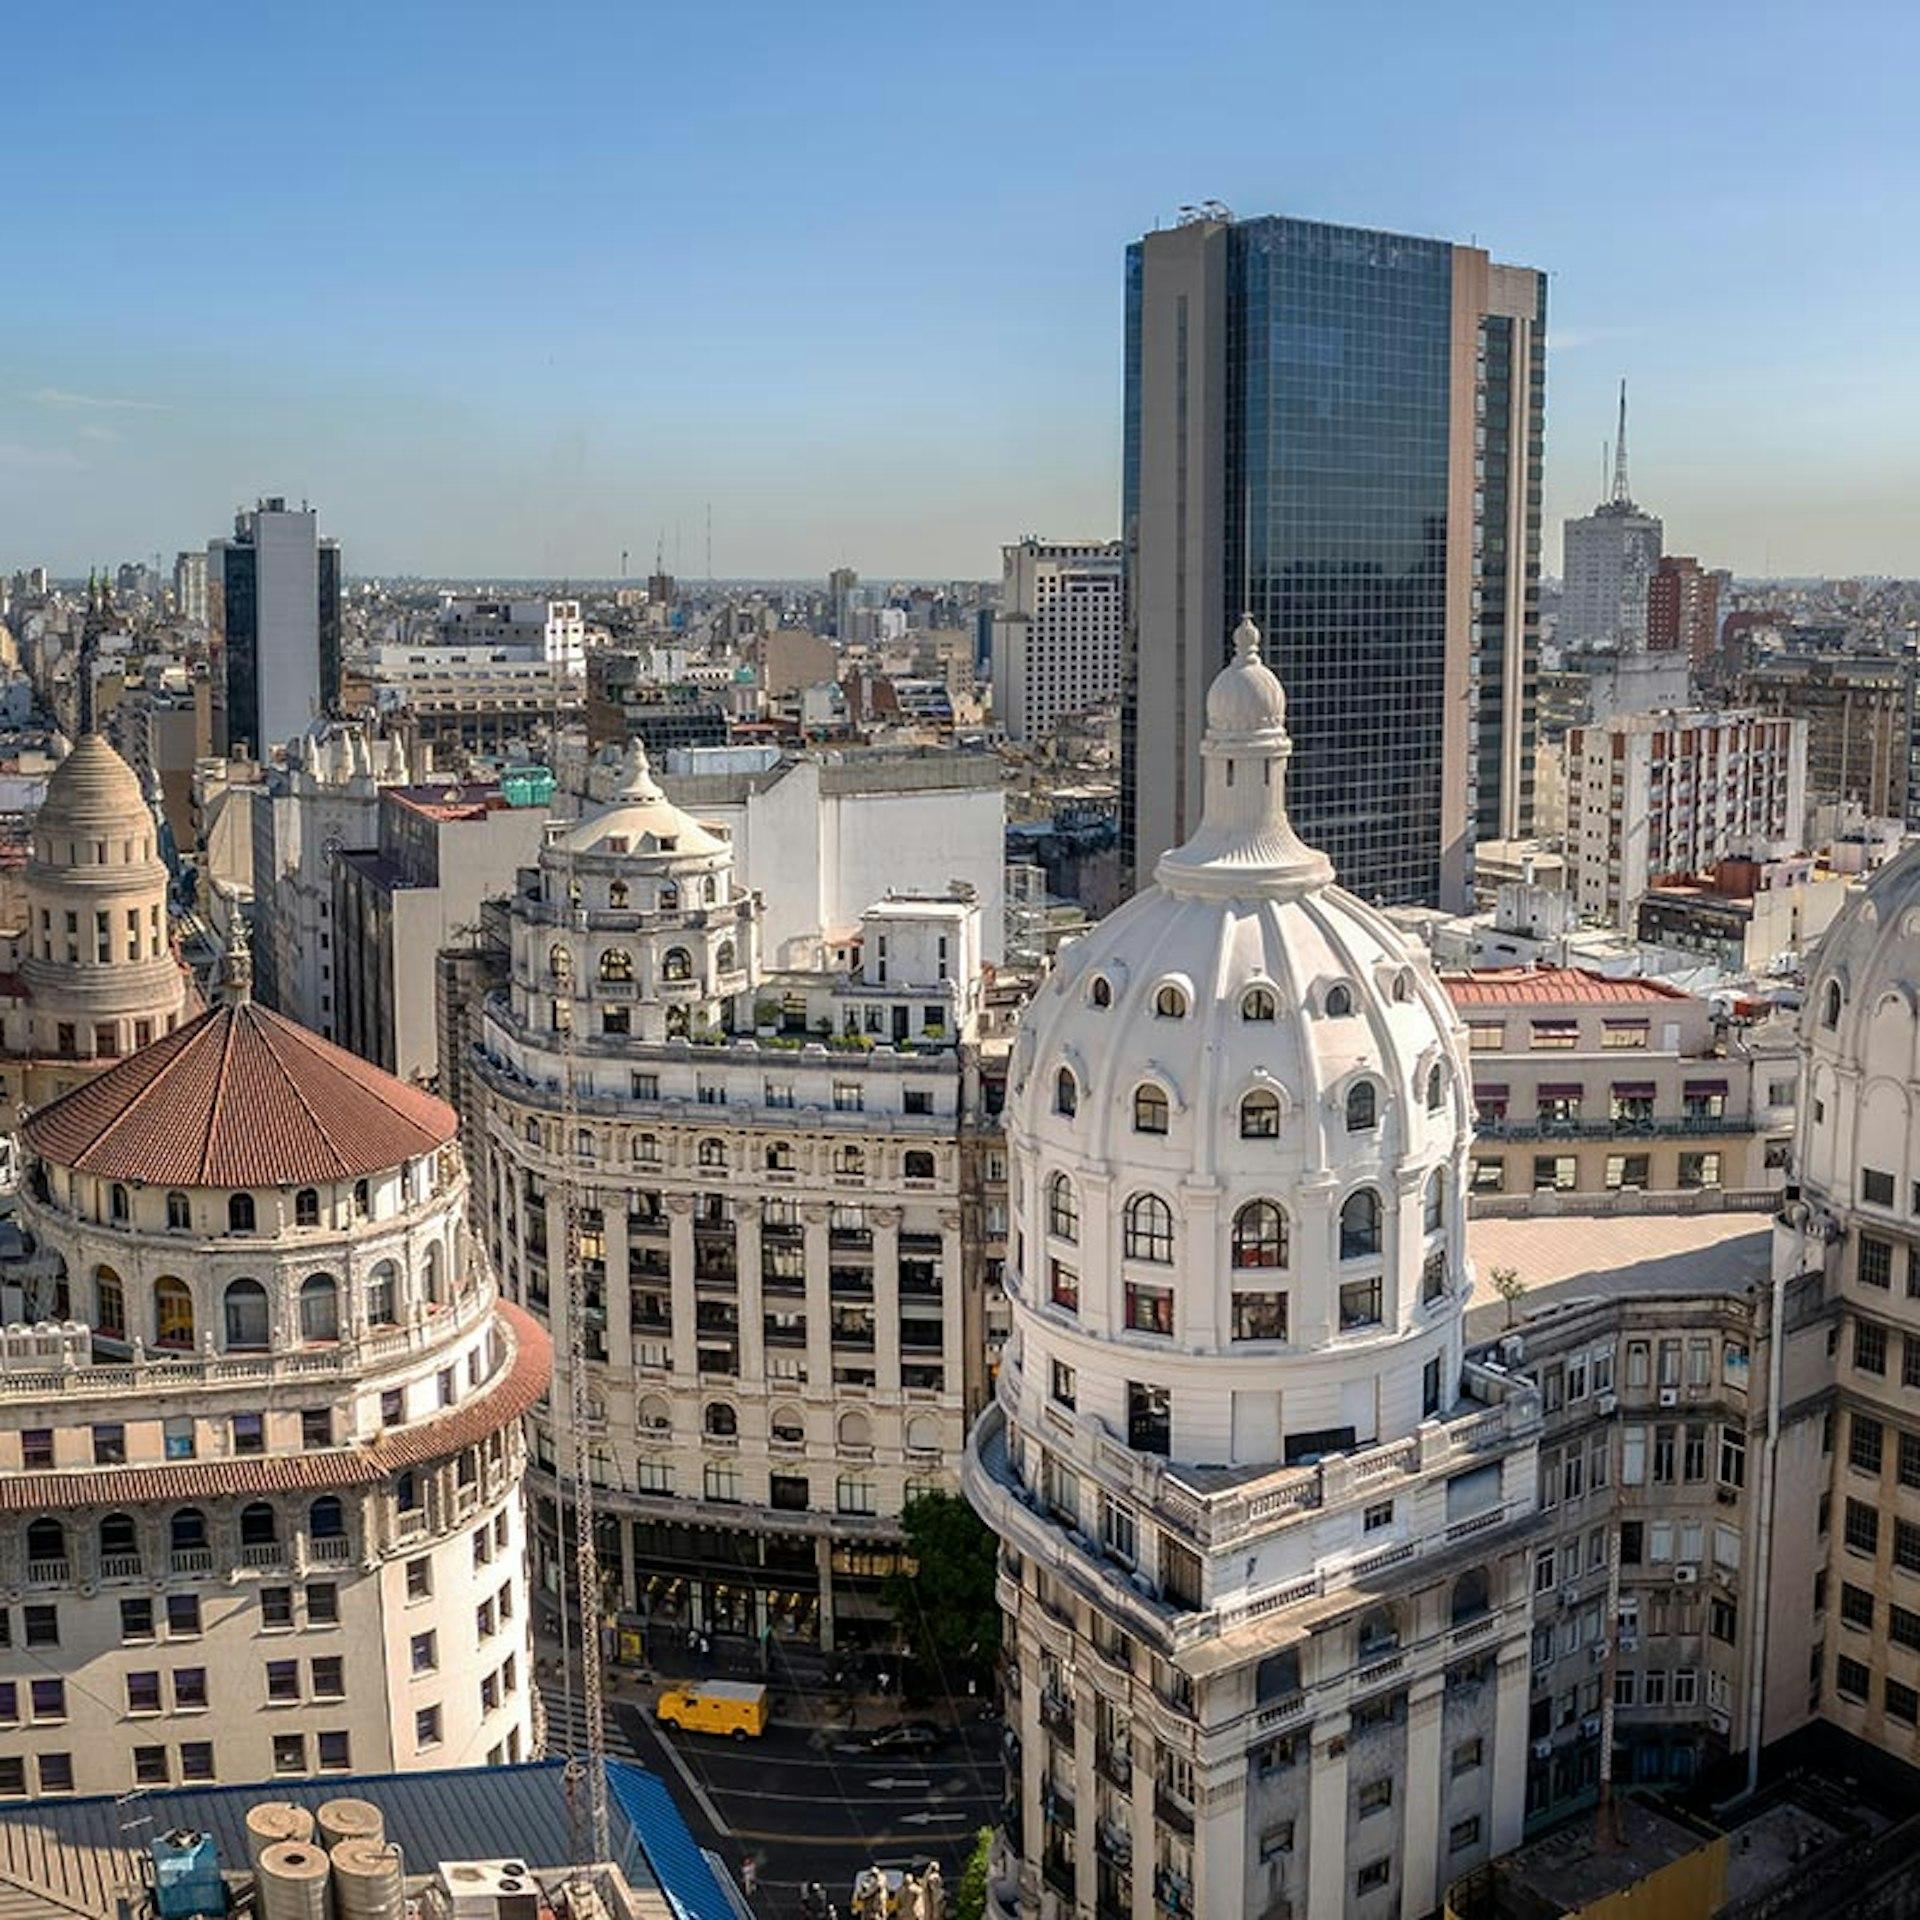 Get the latest news and updates on e-invoicing, e-ordering, e-archiving and indirect tax regulatory requirements for Argentina.